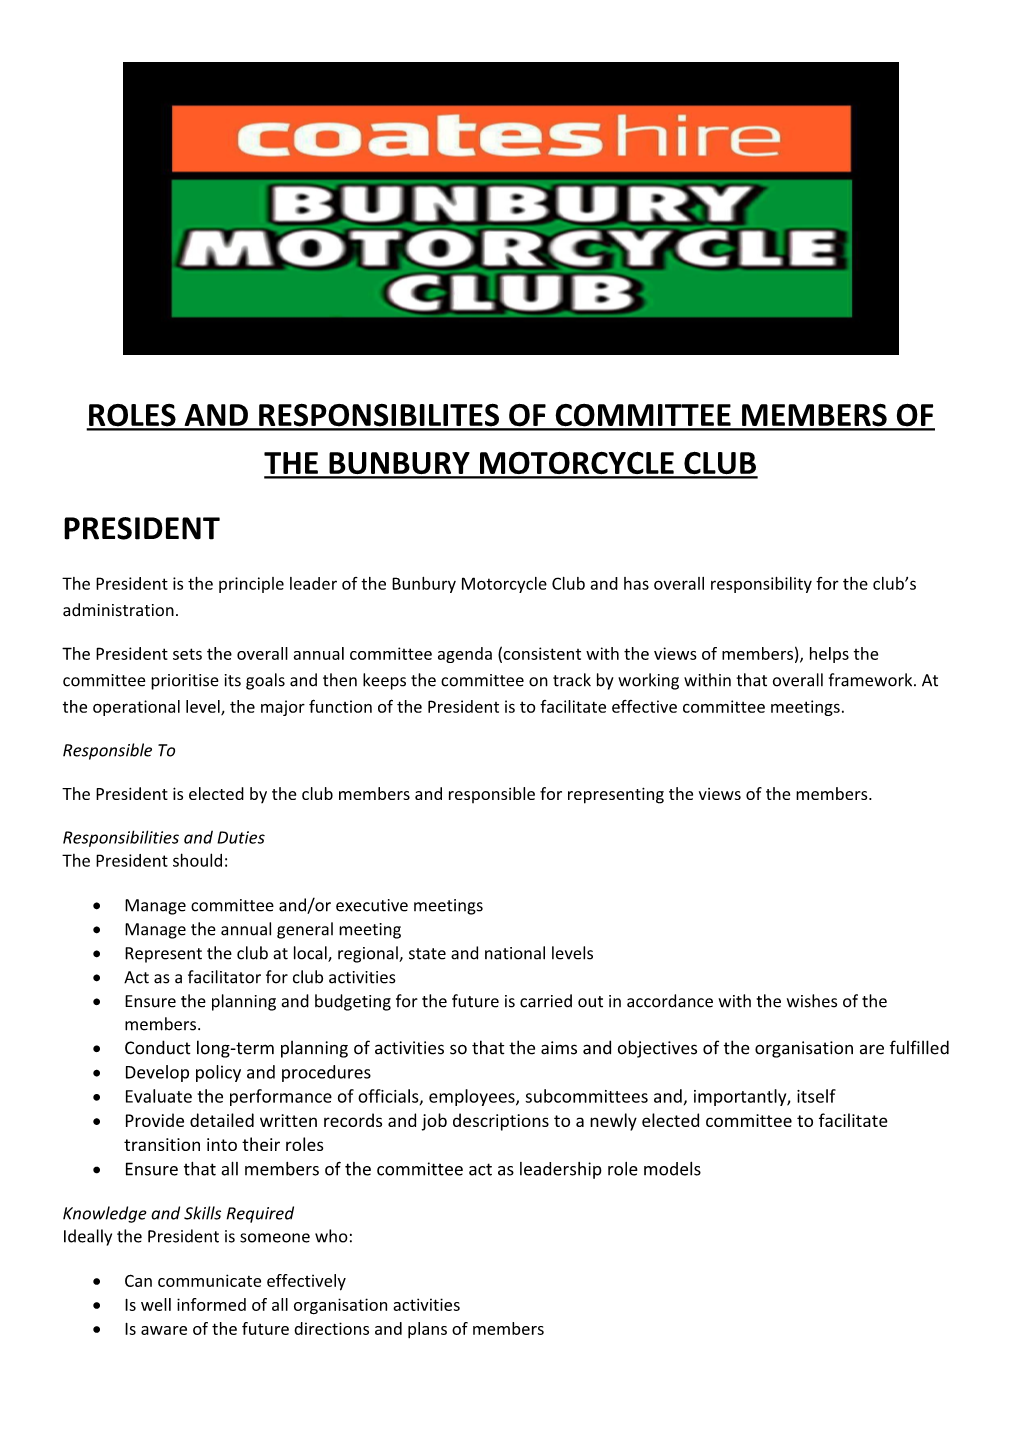 Roles and Responsibilites of Committee Members of the Bunbury Motorcycle Club